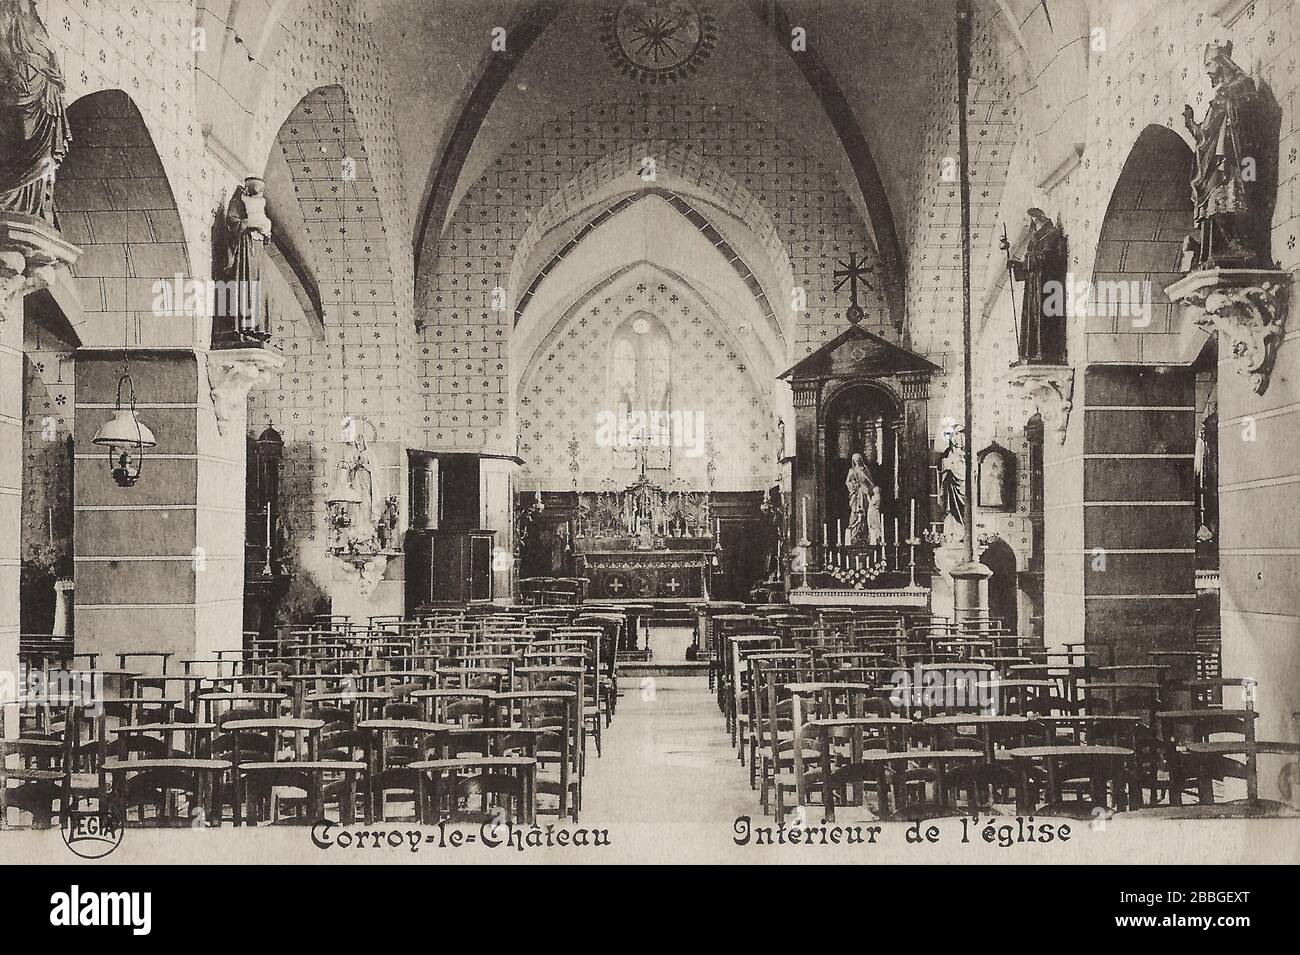 Postcard from around 1900-1920 showing the interior of the church of Corroy-le-Château, near Gembloux, in the province of Namur, Belgium. Stock Photo